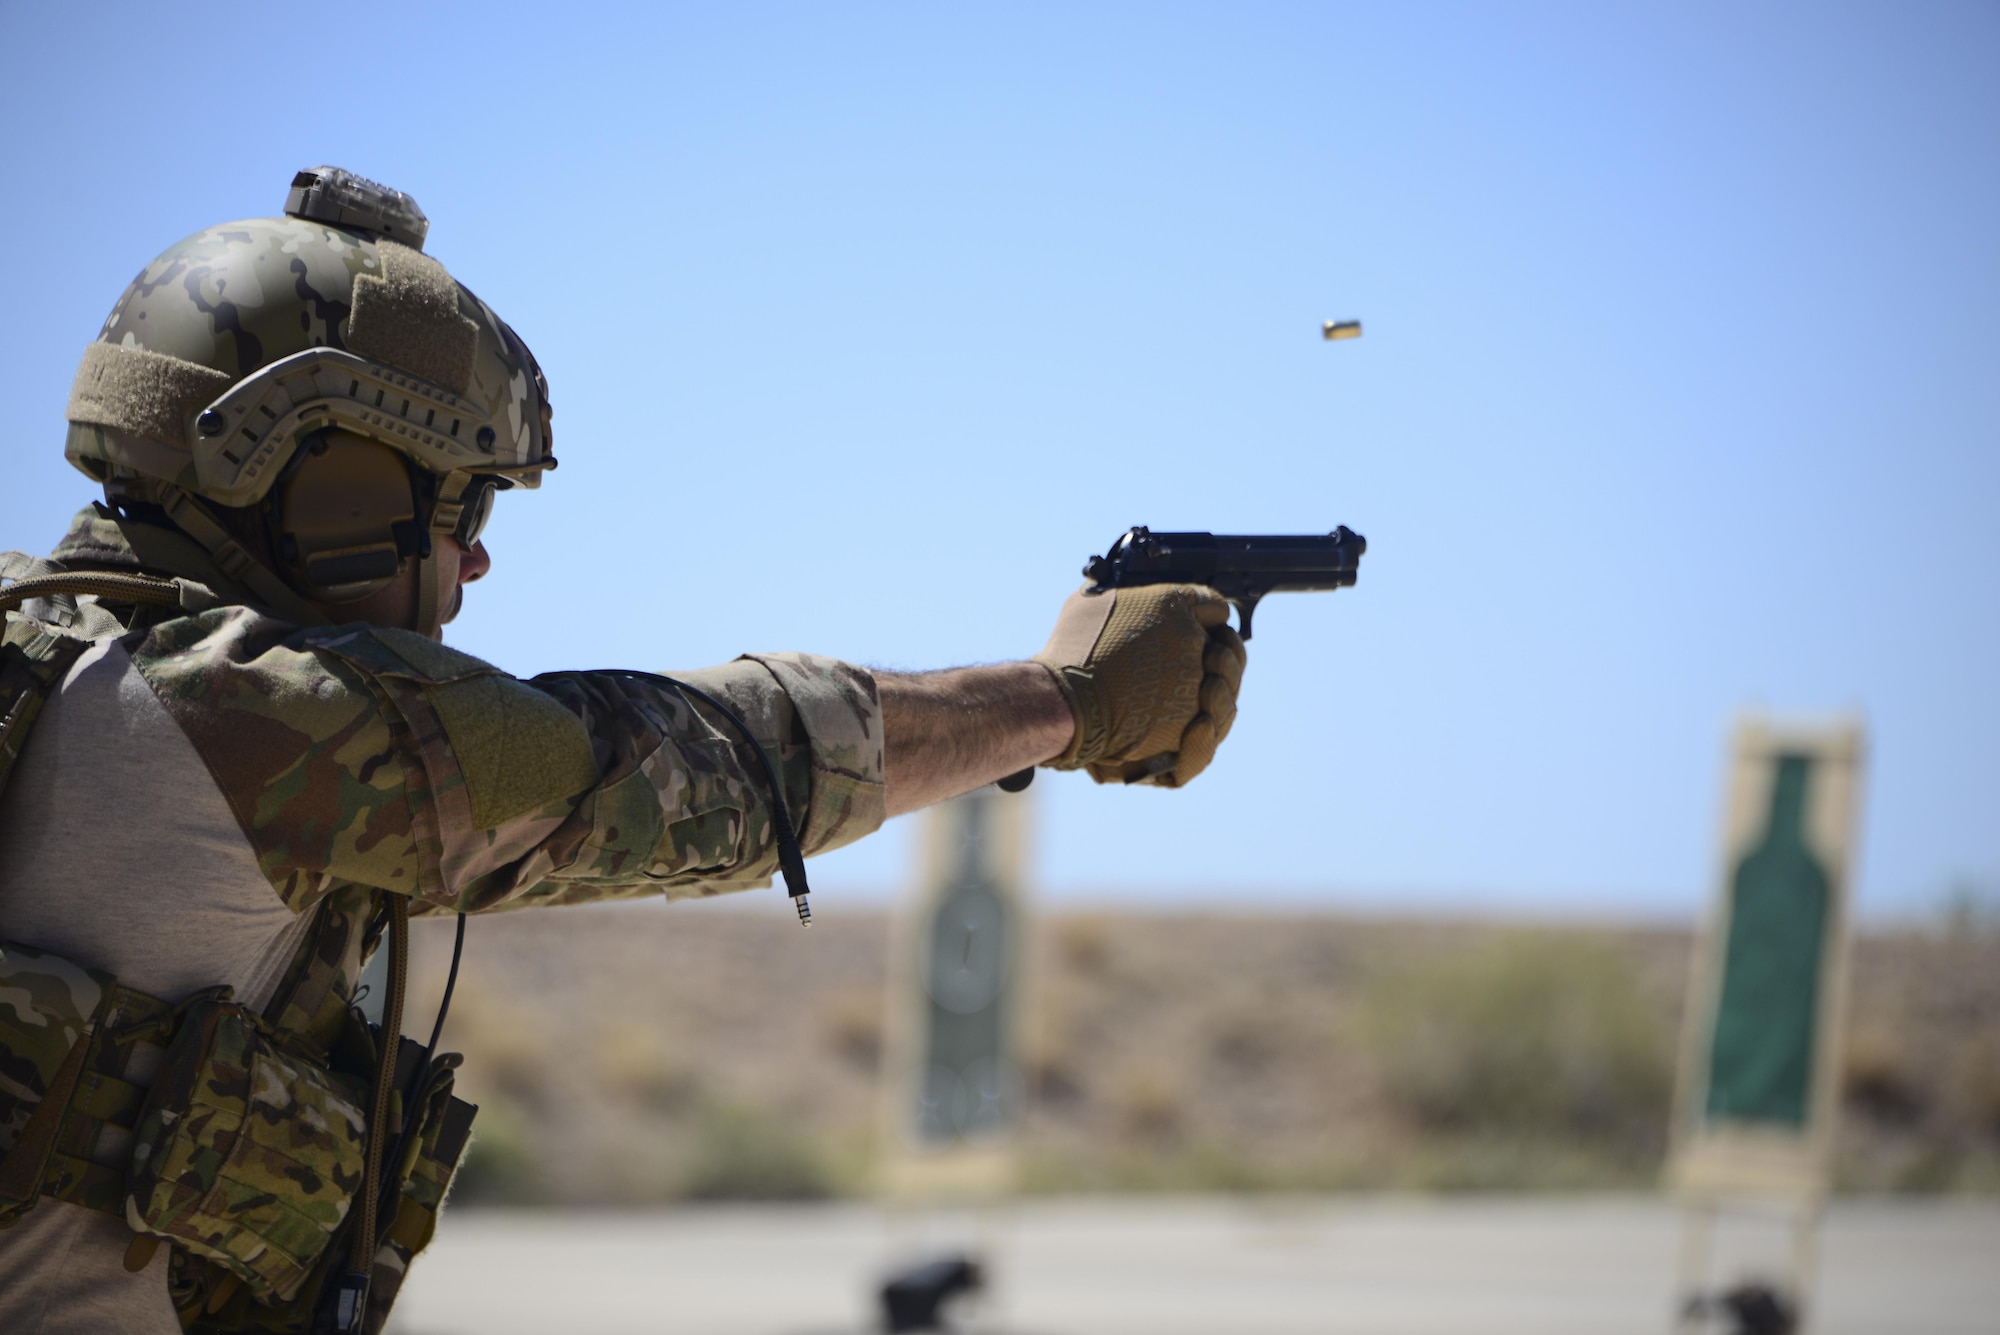 A U.S. Air Force pararescueman fires an M9 pistol at a target during the Guardian Angel Mission Qualification Training course at Davis-Monthan Air Force Base, Ariz., May 17, 2017. The MQT is a 90 day course that takes pararescuemen who have completed Air Education and Training Command schooling and helps them achieve their 5-level qualification. (U.S. Air Force photo by Airman 1st Class Nathan H. Barbour)